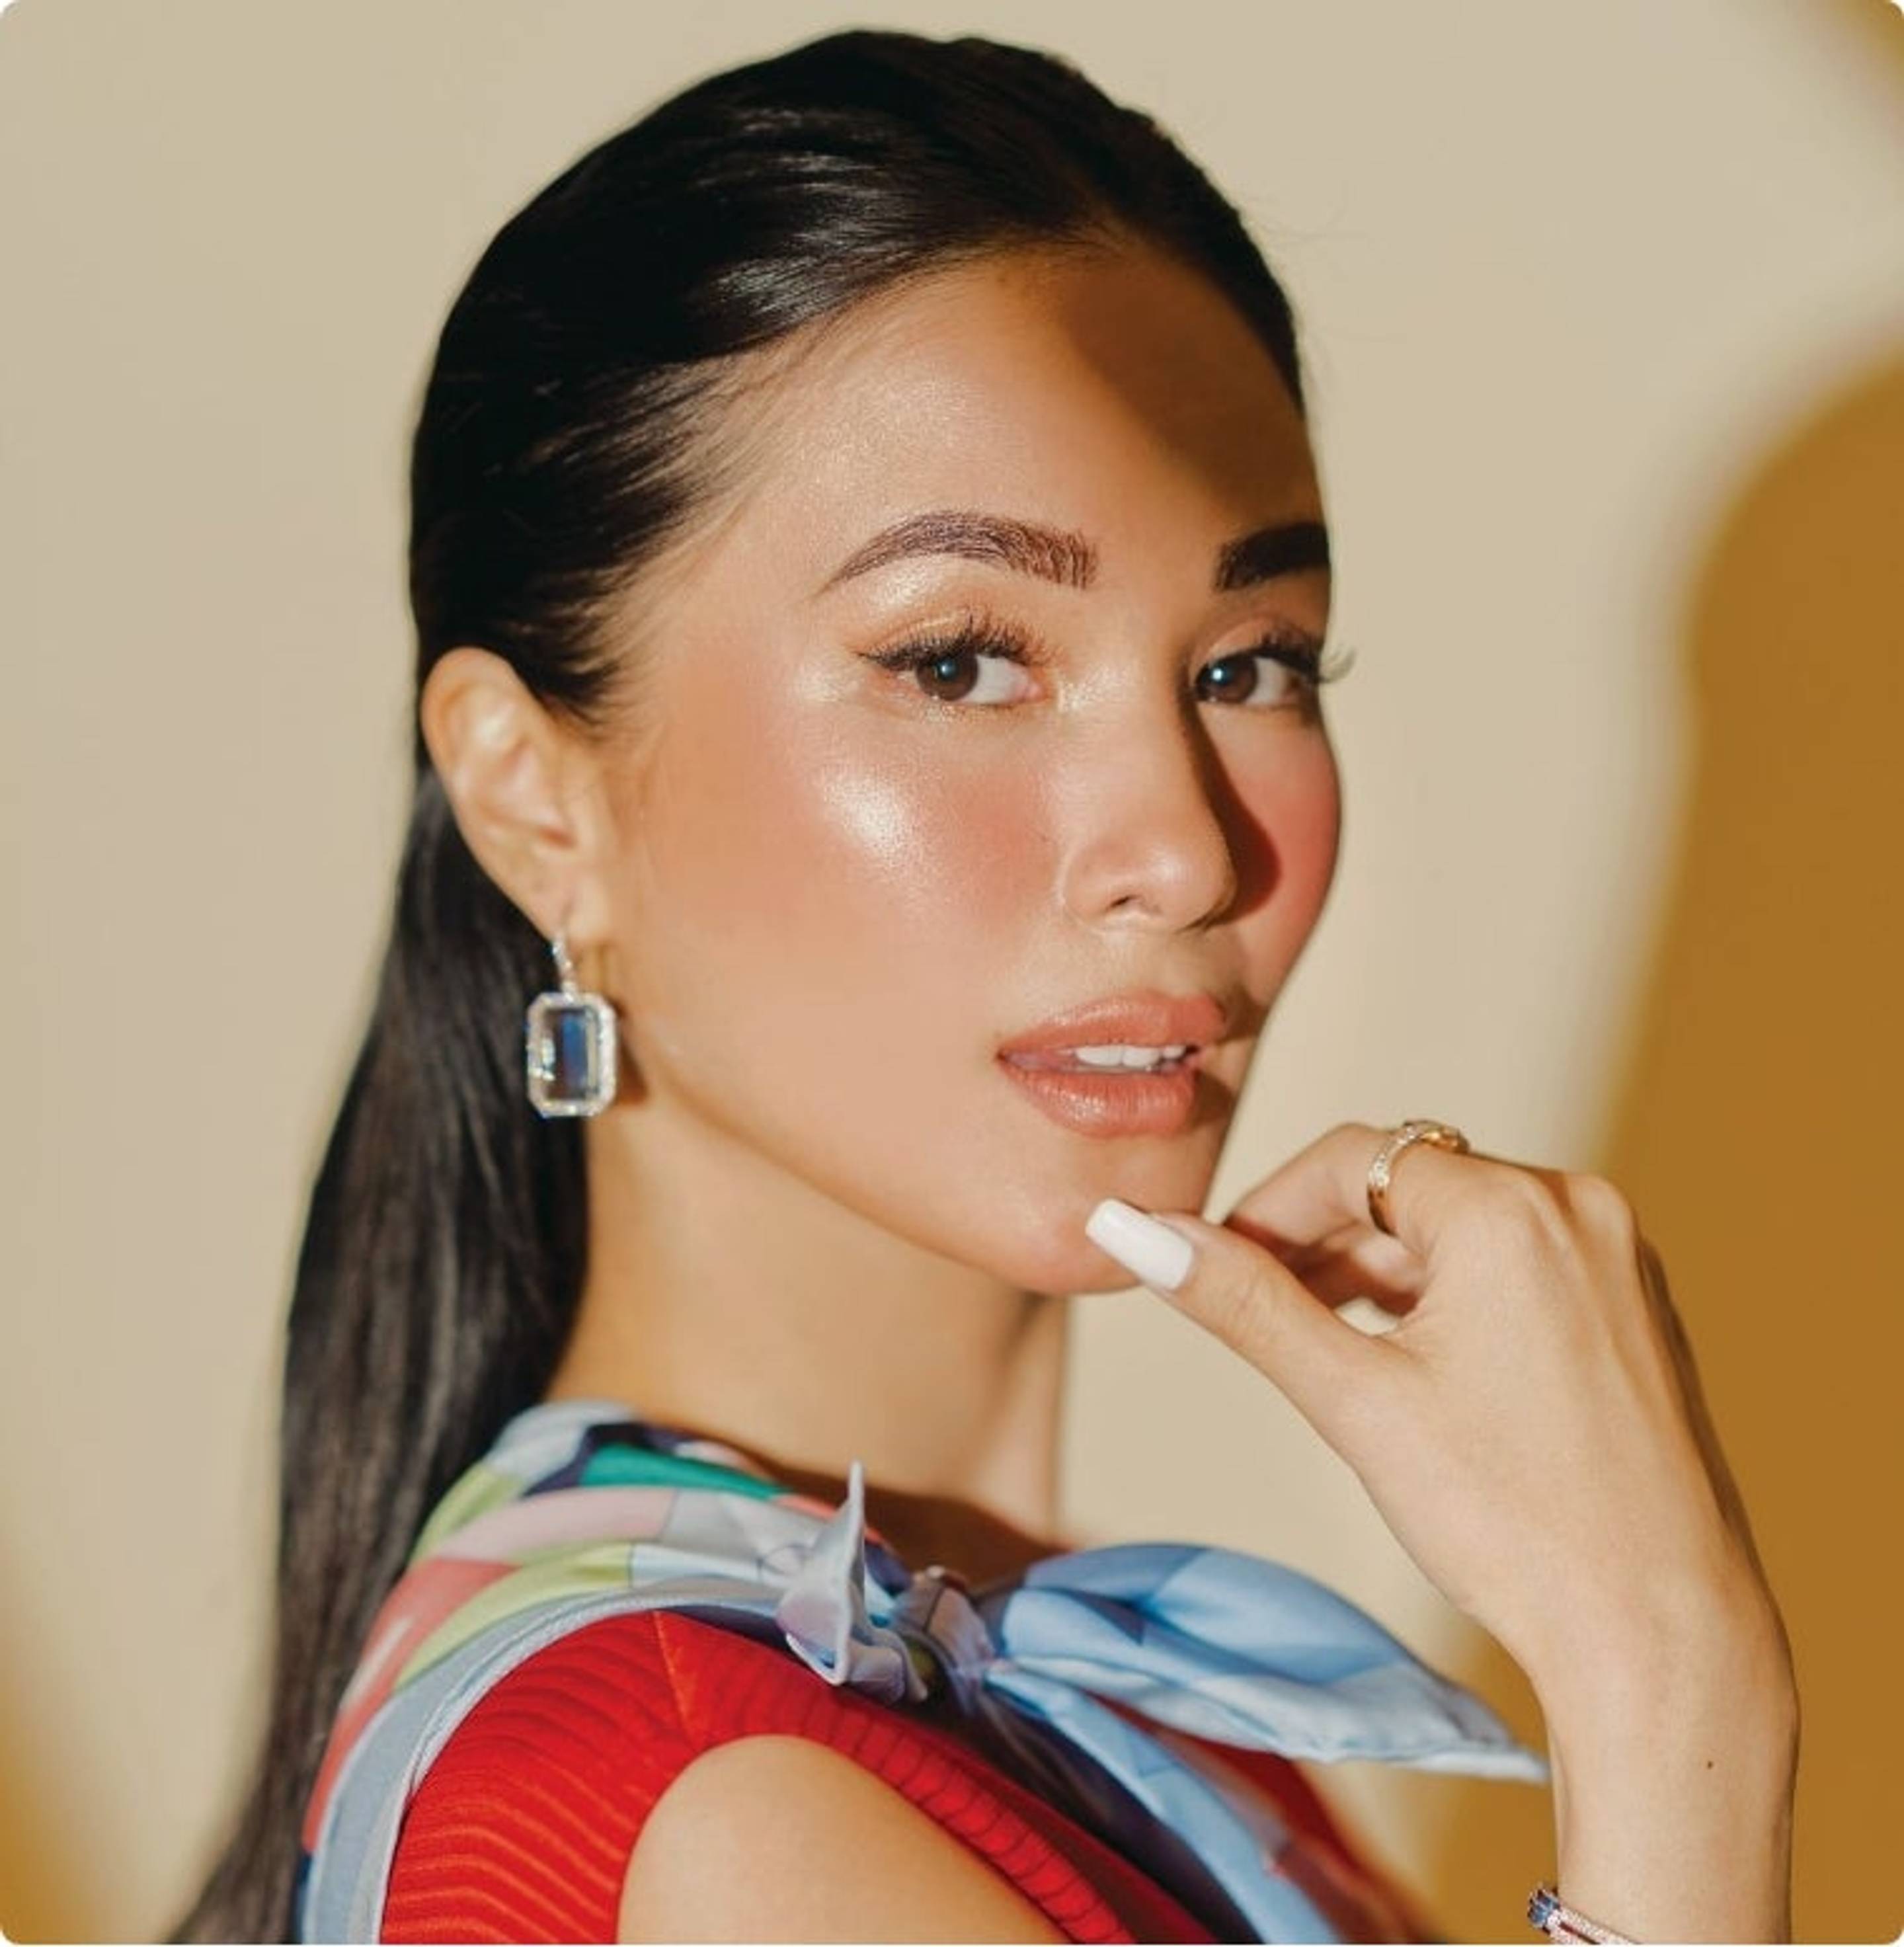 Does Heart Evangelista get to keep fashion pieces sent to her?